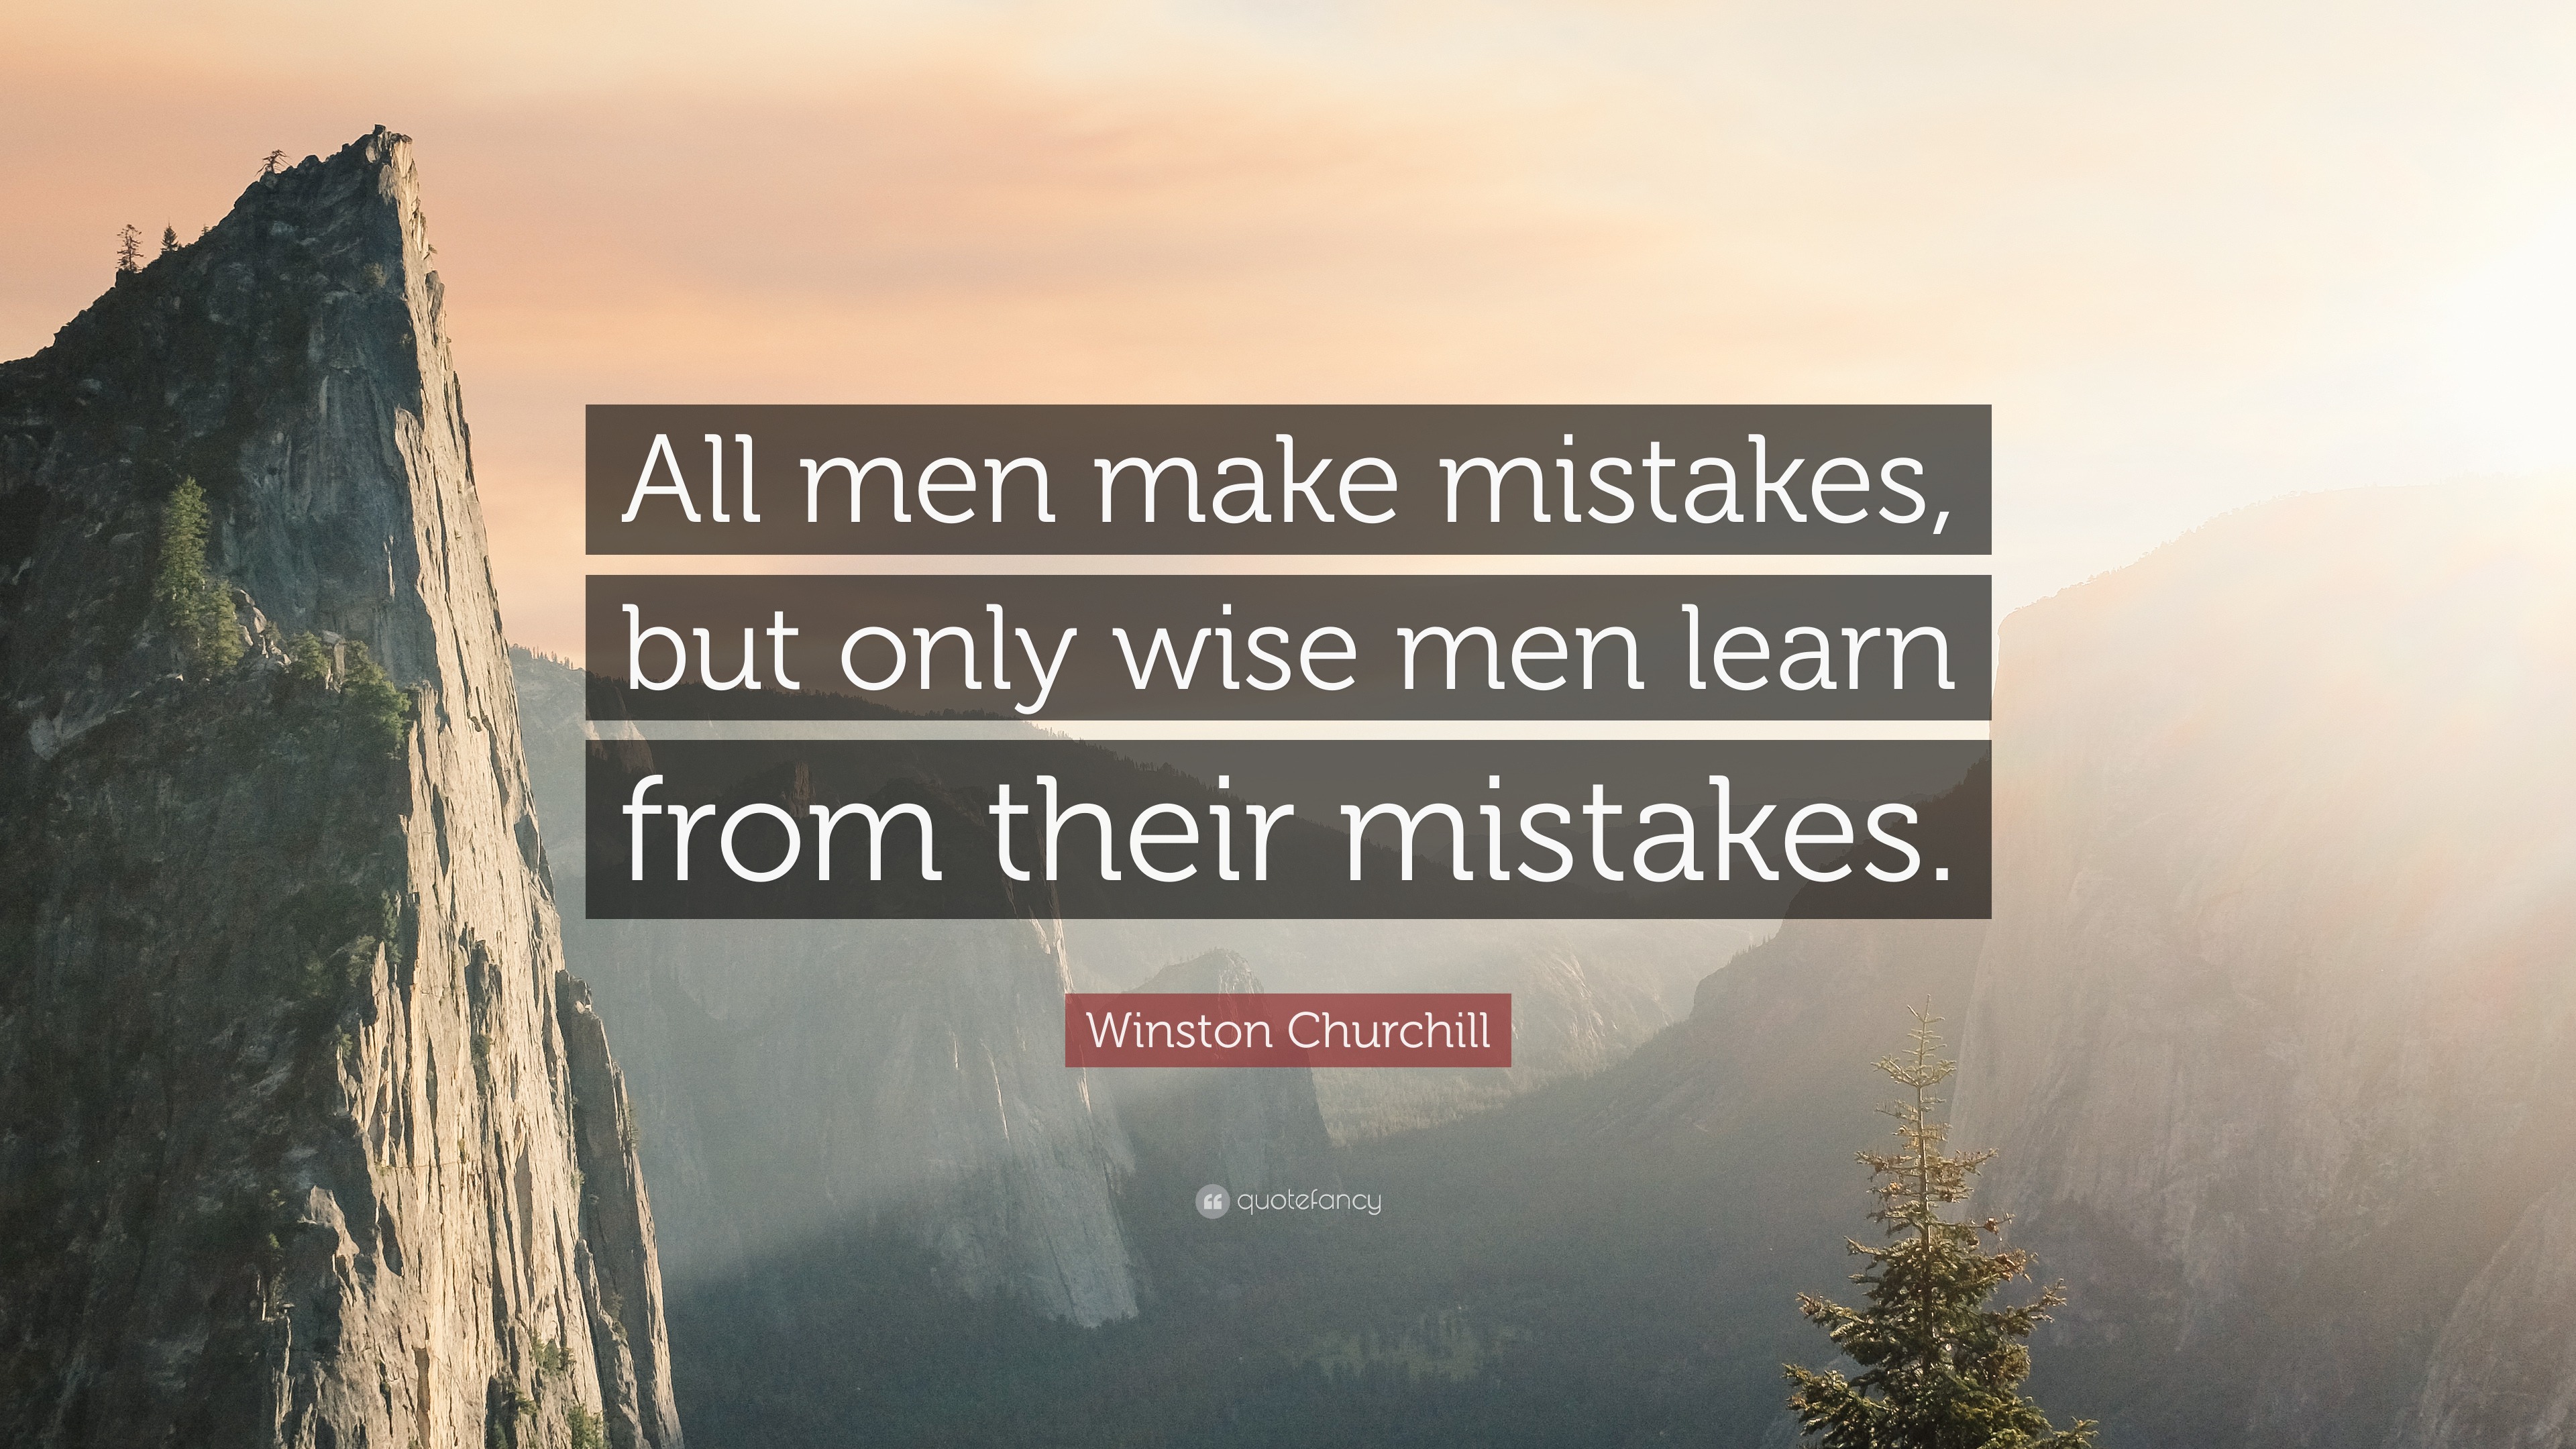 Winston Churchill Quote: “All men make mistakes, but only wise men